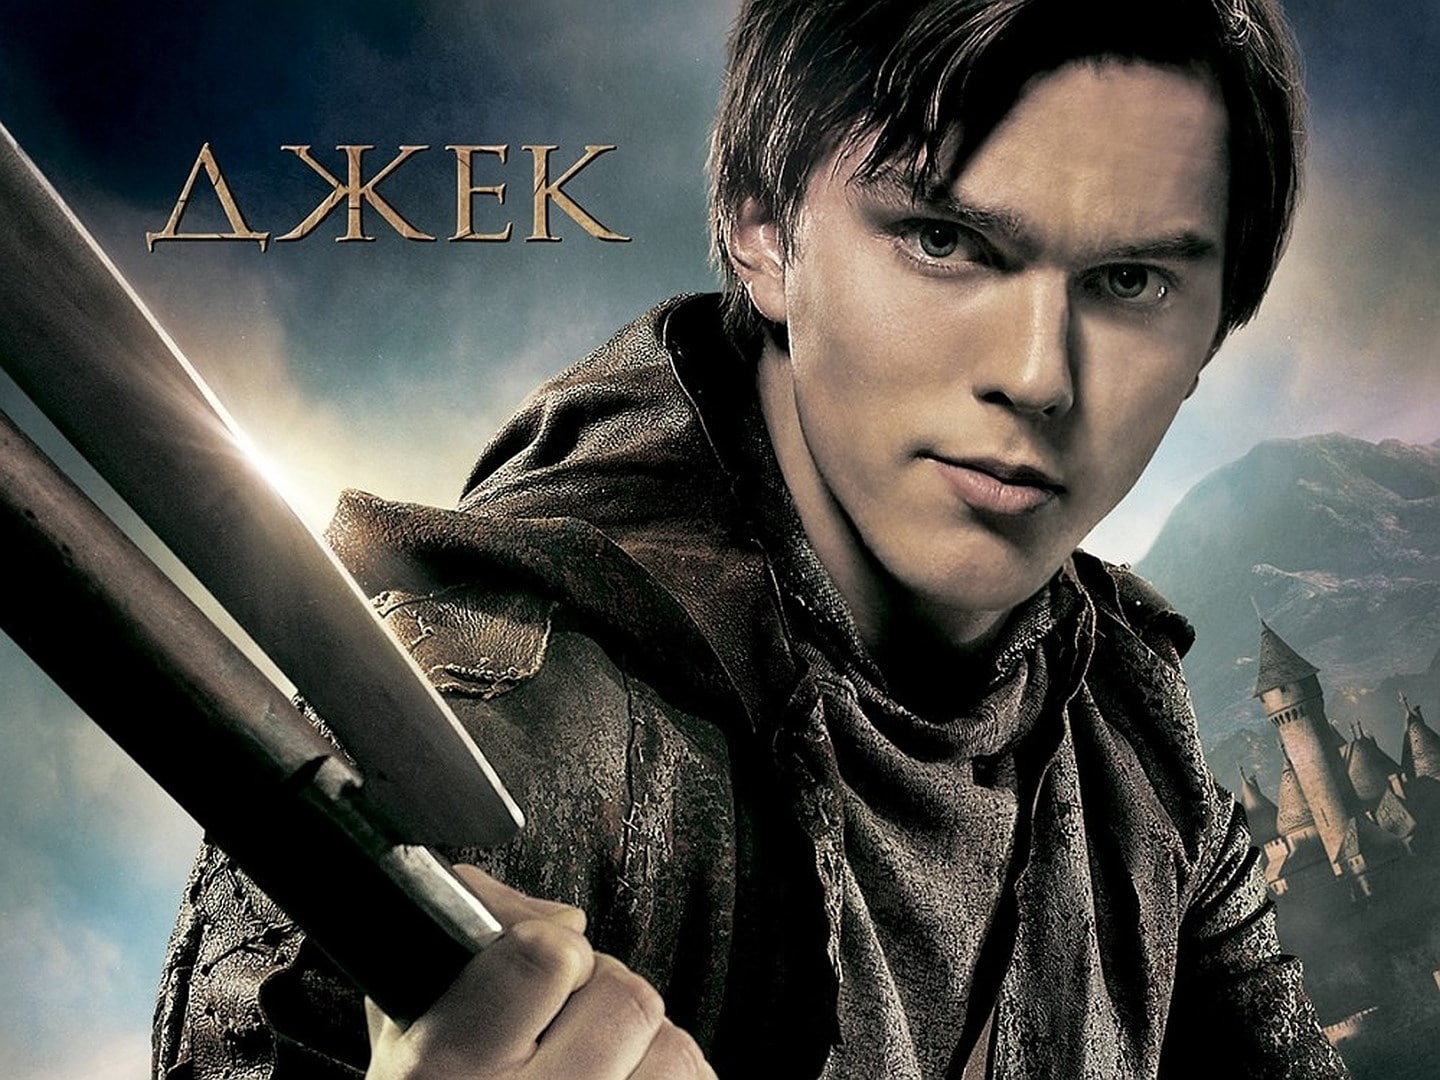 jack the giant slayer, one person, portrait, young adult, headshot